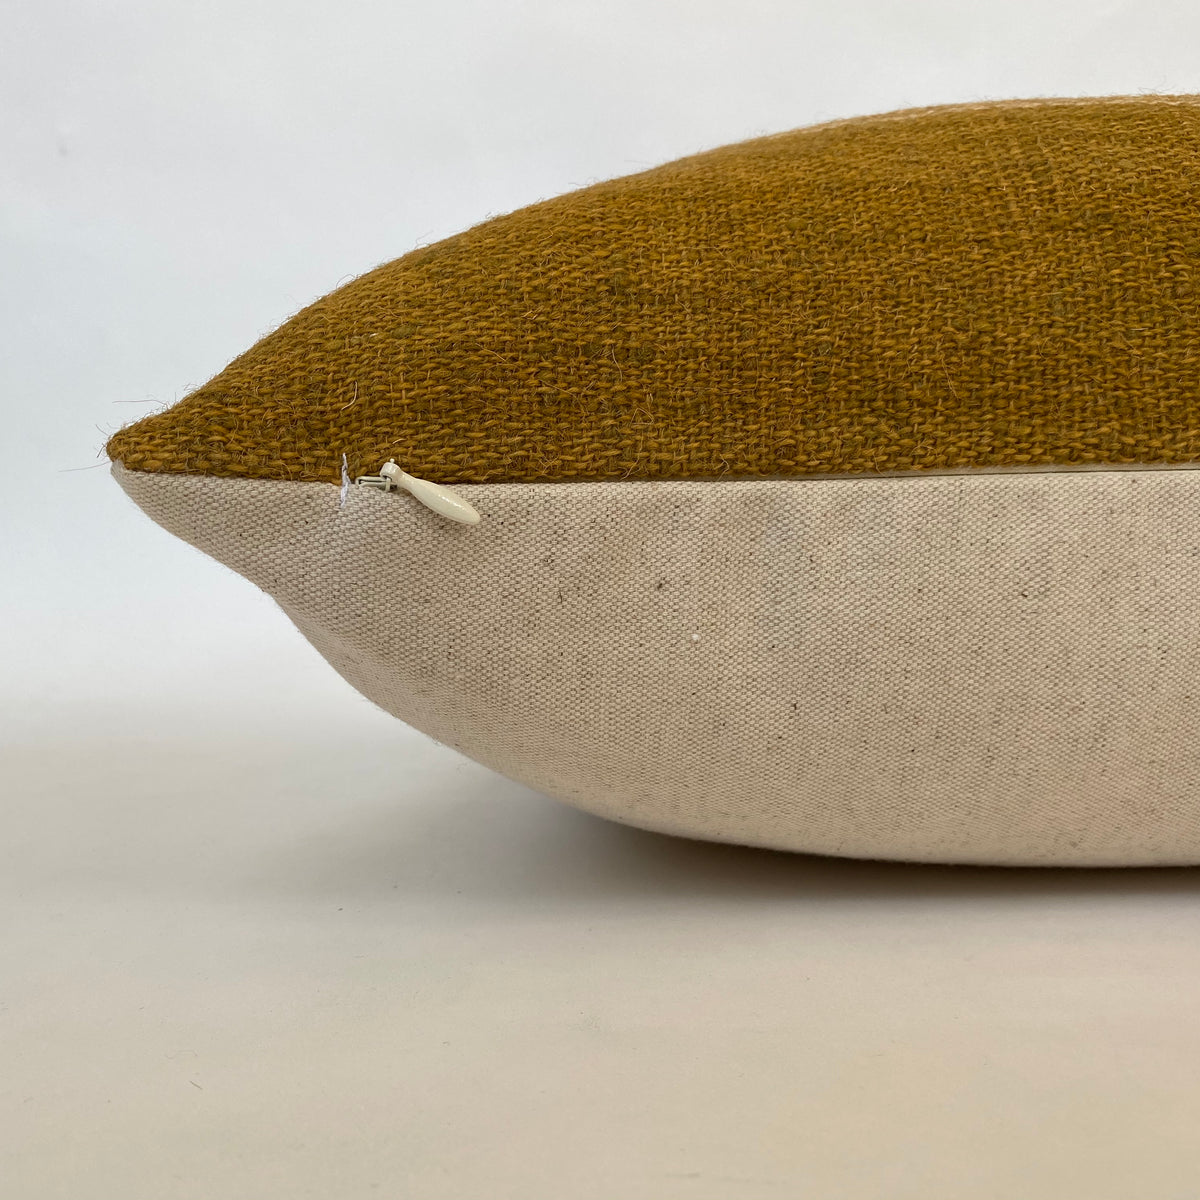 Indian Wool Pillow Cover | Mustard